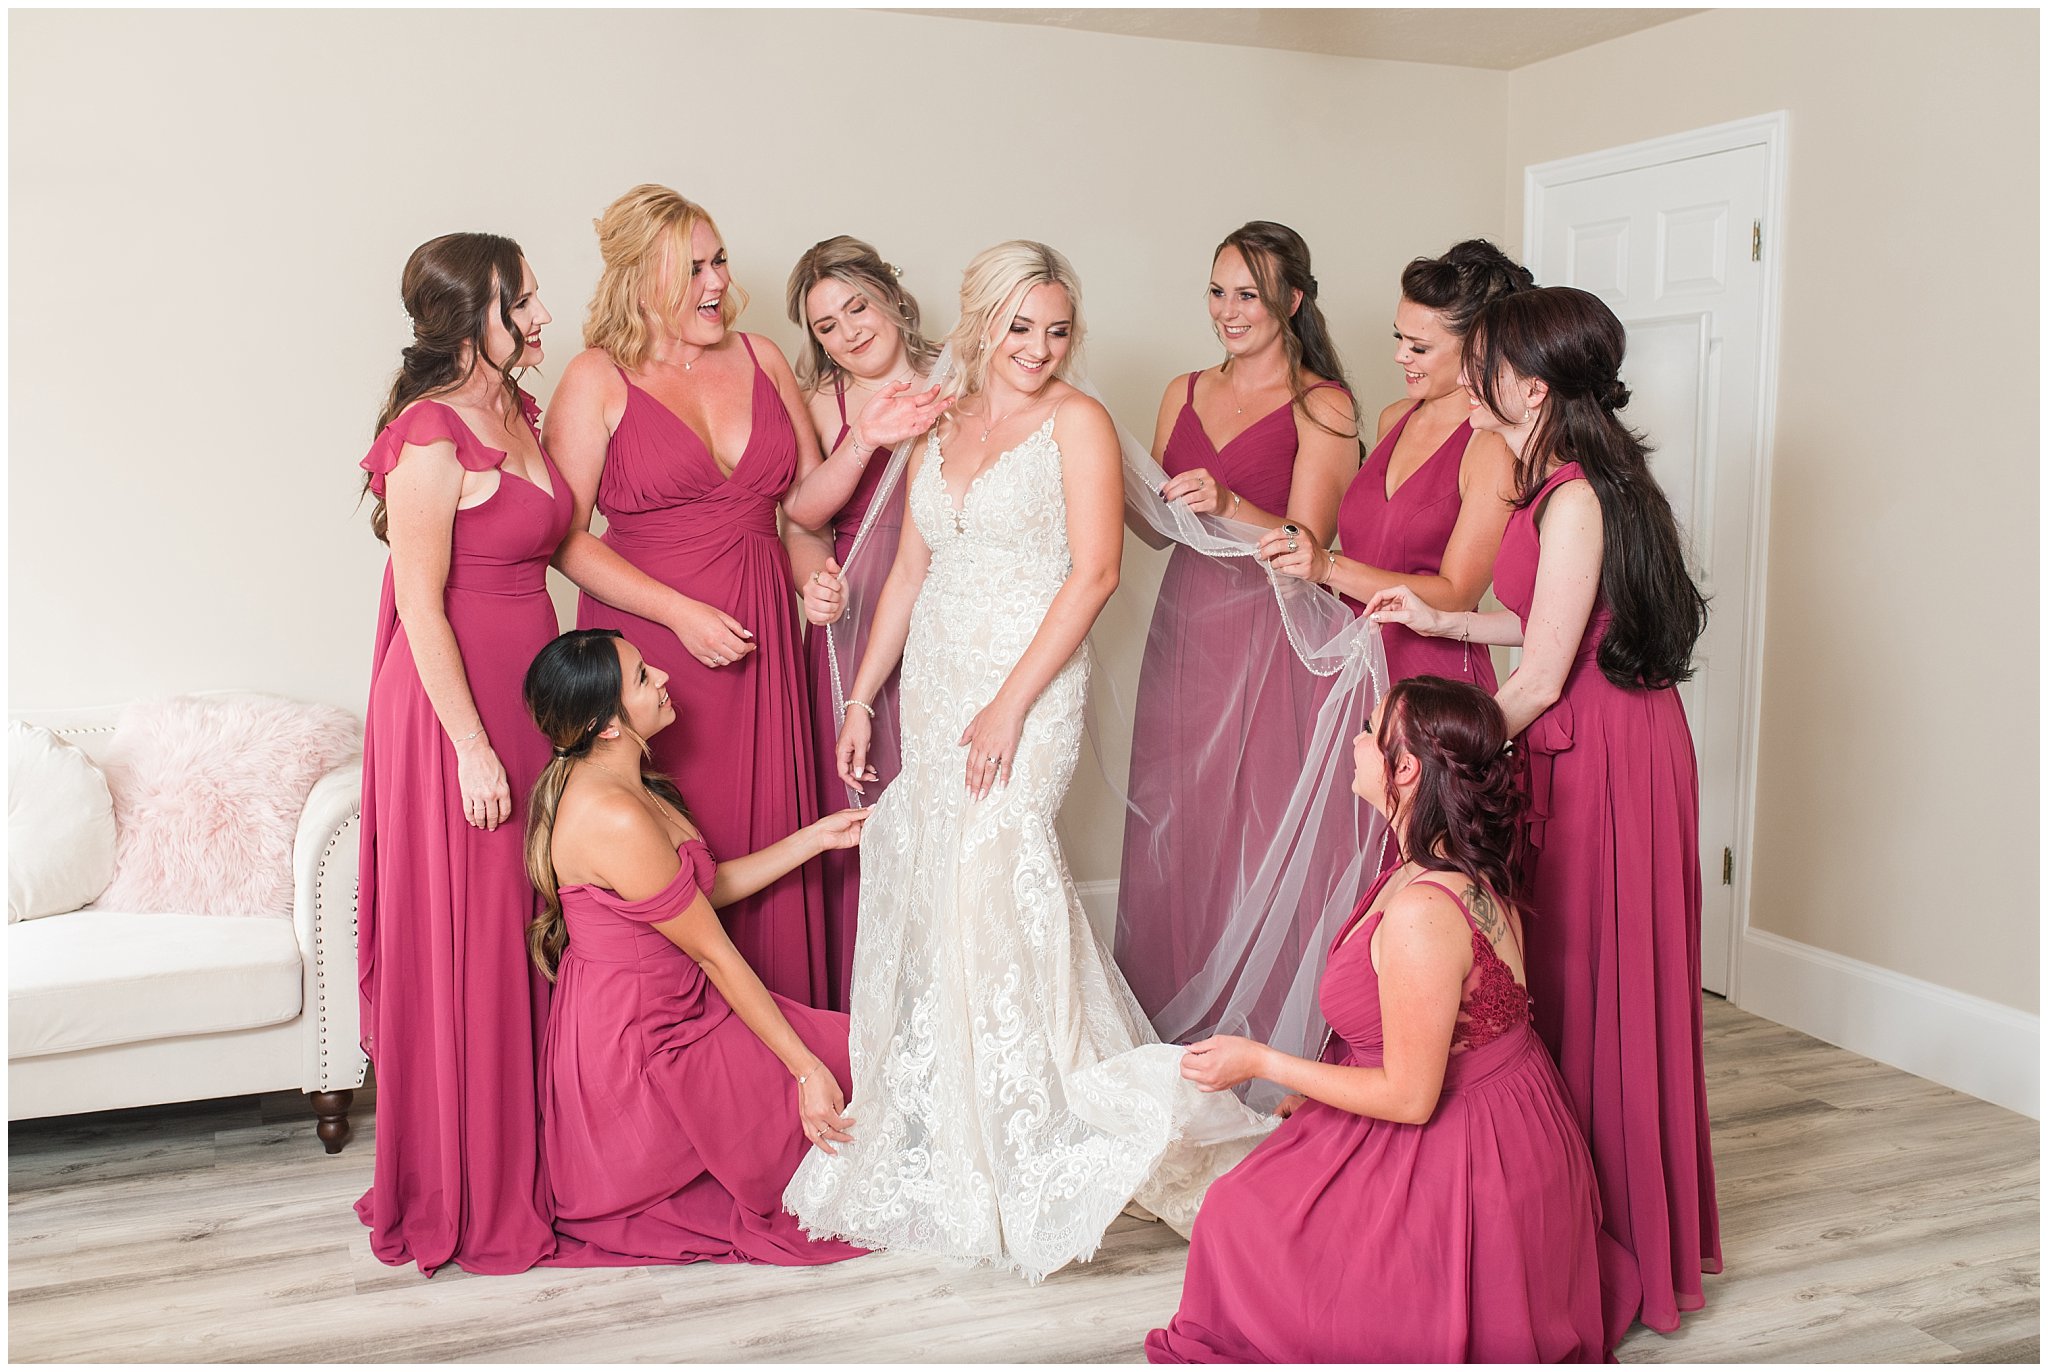 Bride getting ready with bridesmaids | Dusty Blue and Rose Summer Wedding at Oak Hills Utah | Jessie and Dallin Photography